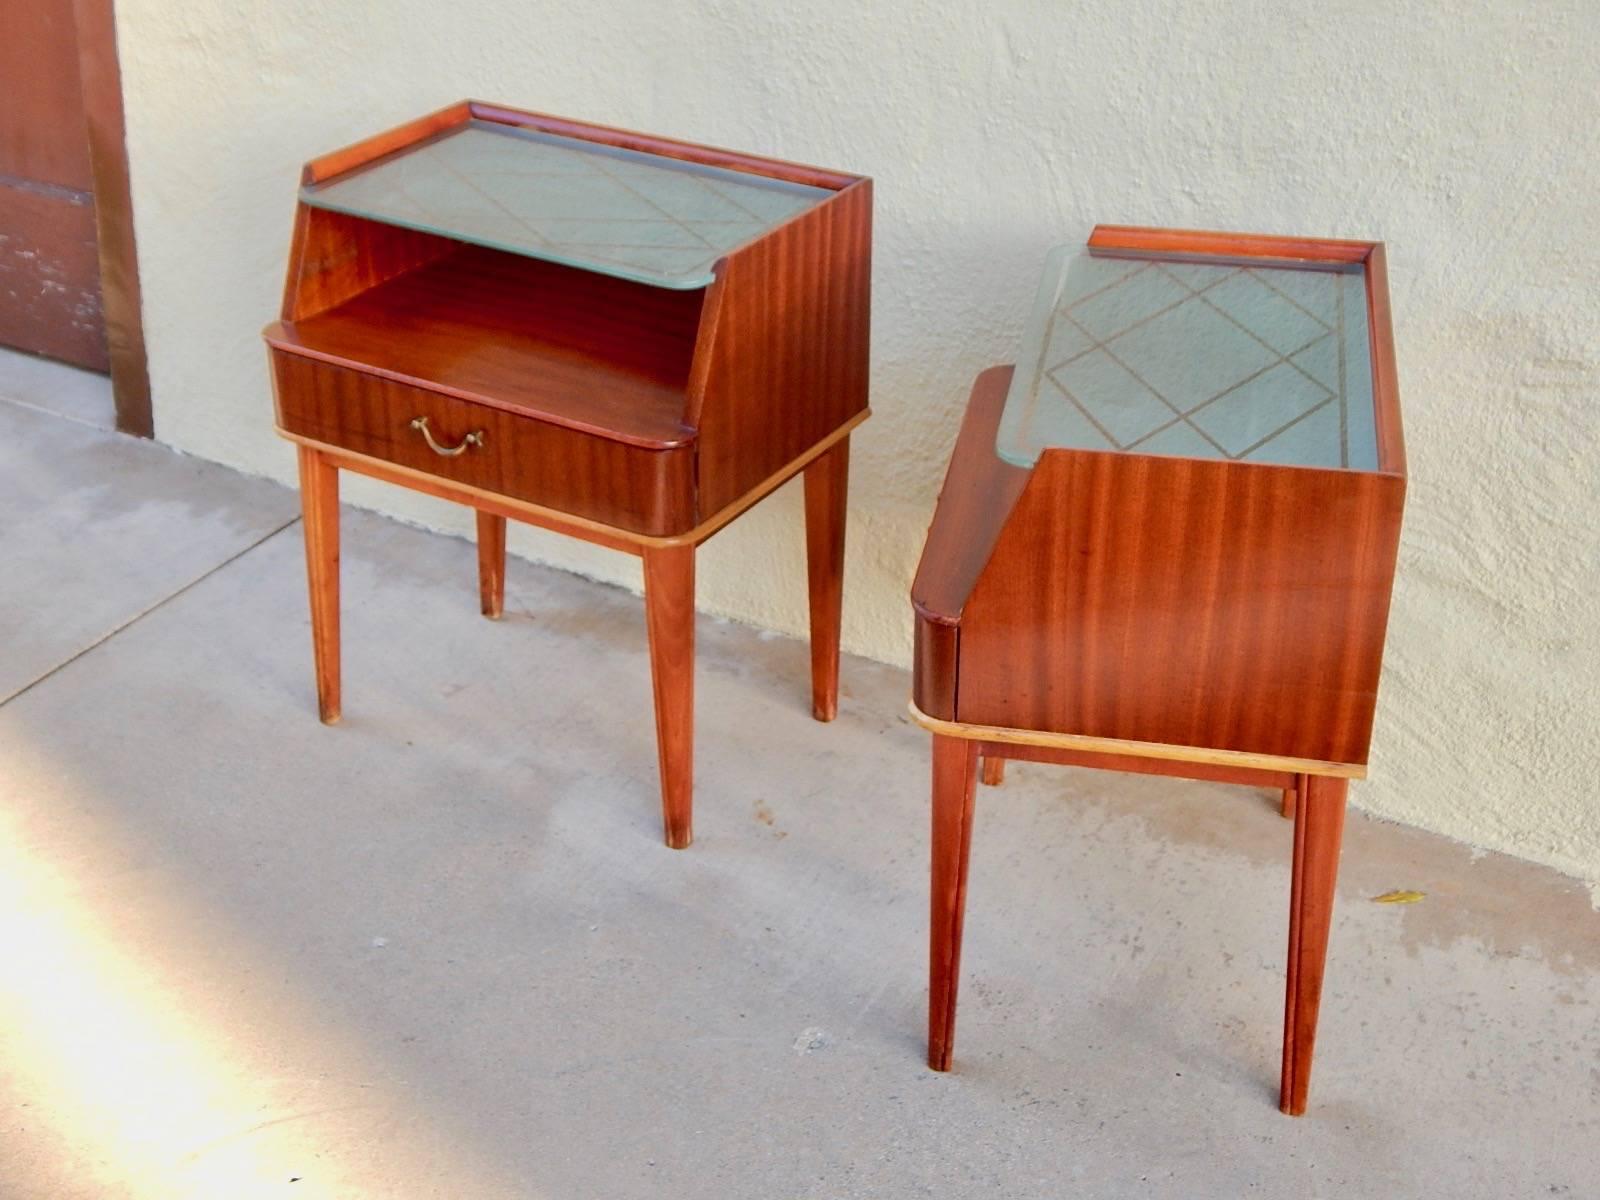 Mid-20th Century Pair of Swedish Mid-Century Modern End Tables in Mahogany and Glass, circa 1950 For Sale